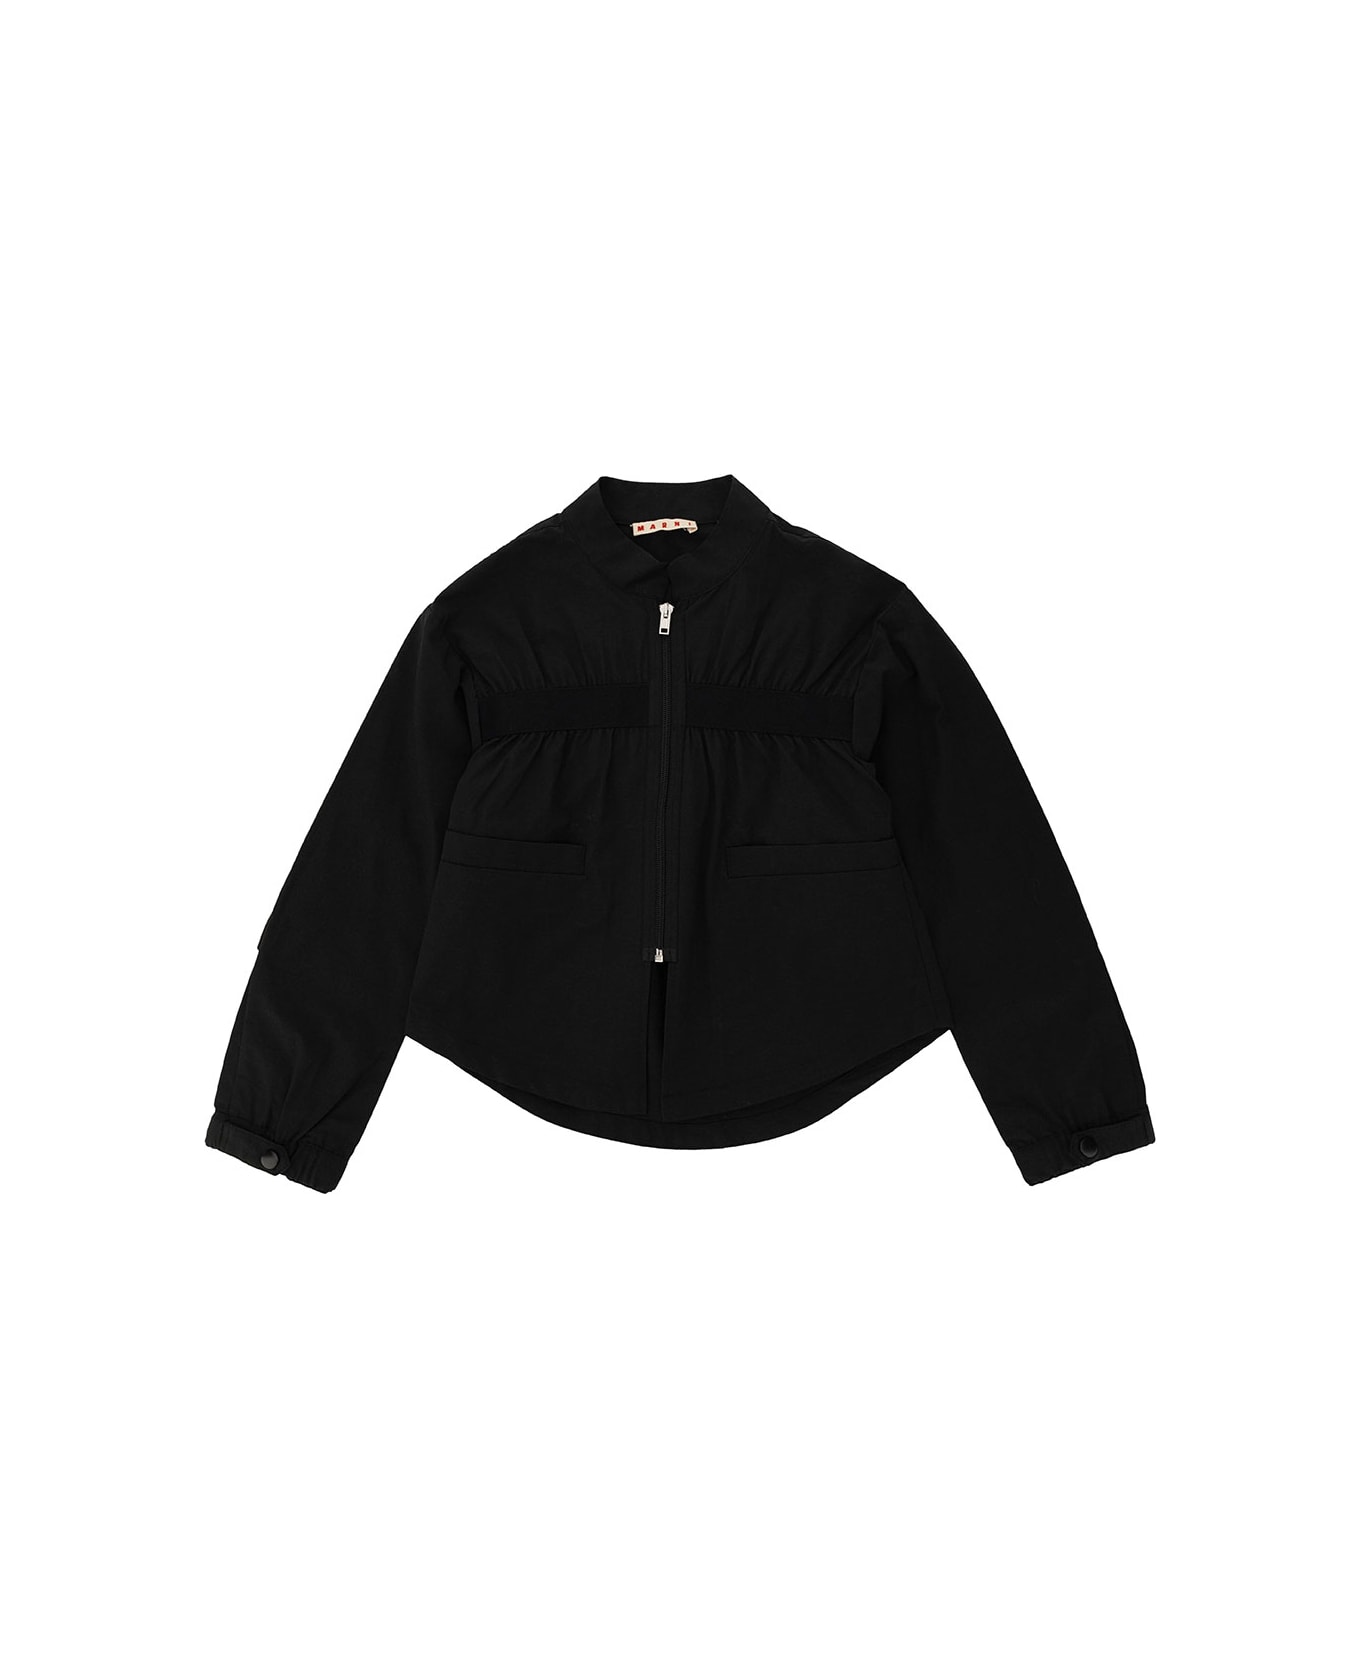 Marni Black Jacket With Contrasting Logo At The Back In Cotton Blend Girl - Black